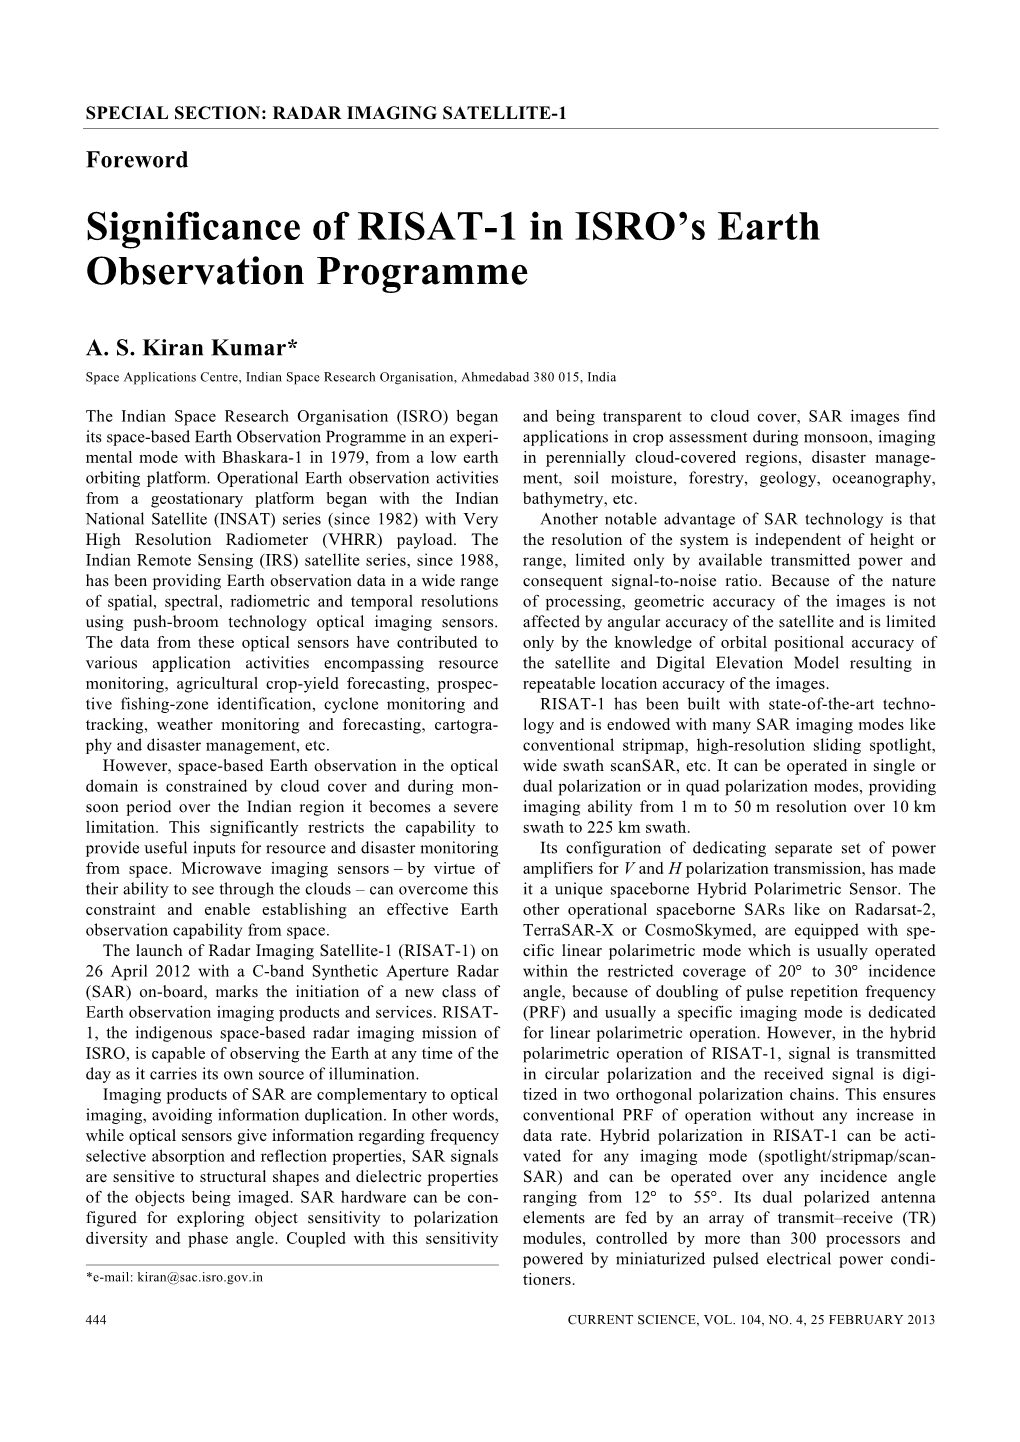 Significance of RISAT-1 in ISRO's Earth Observation Programme